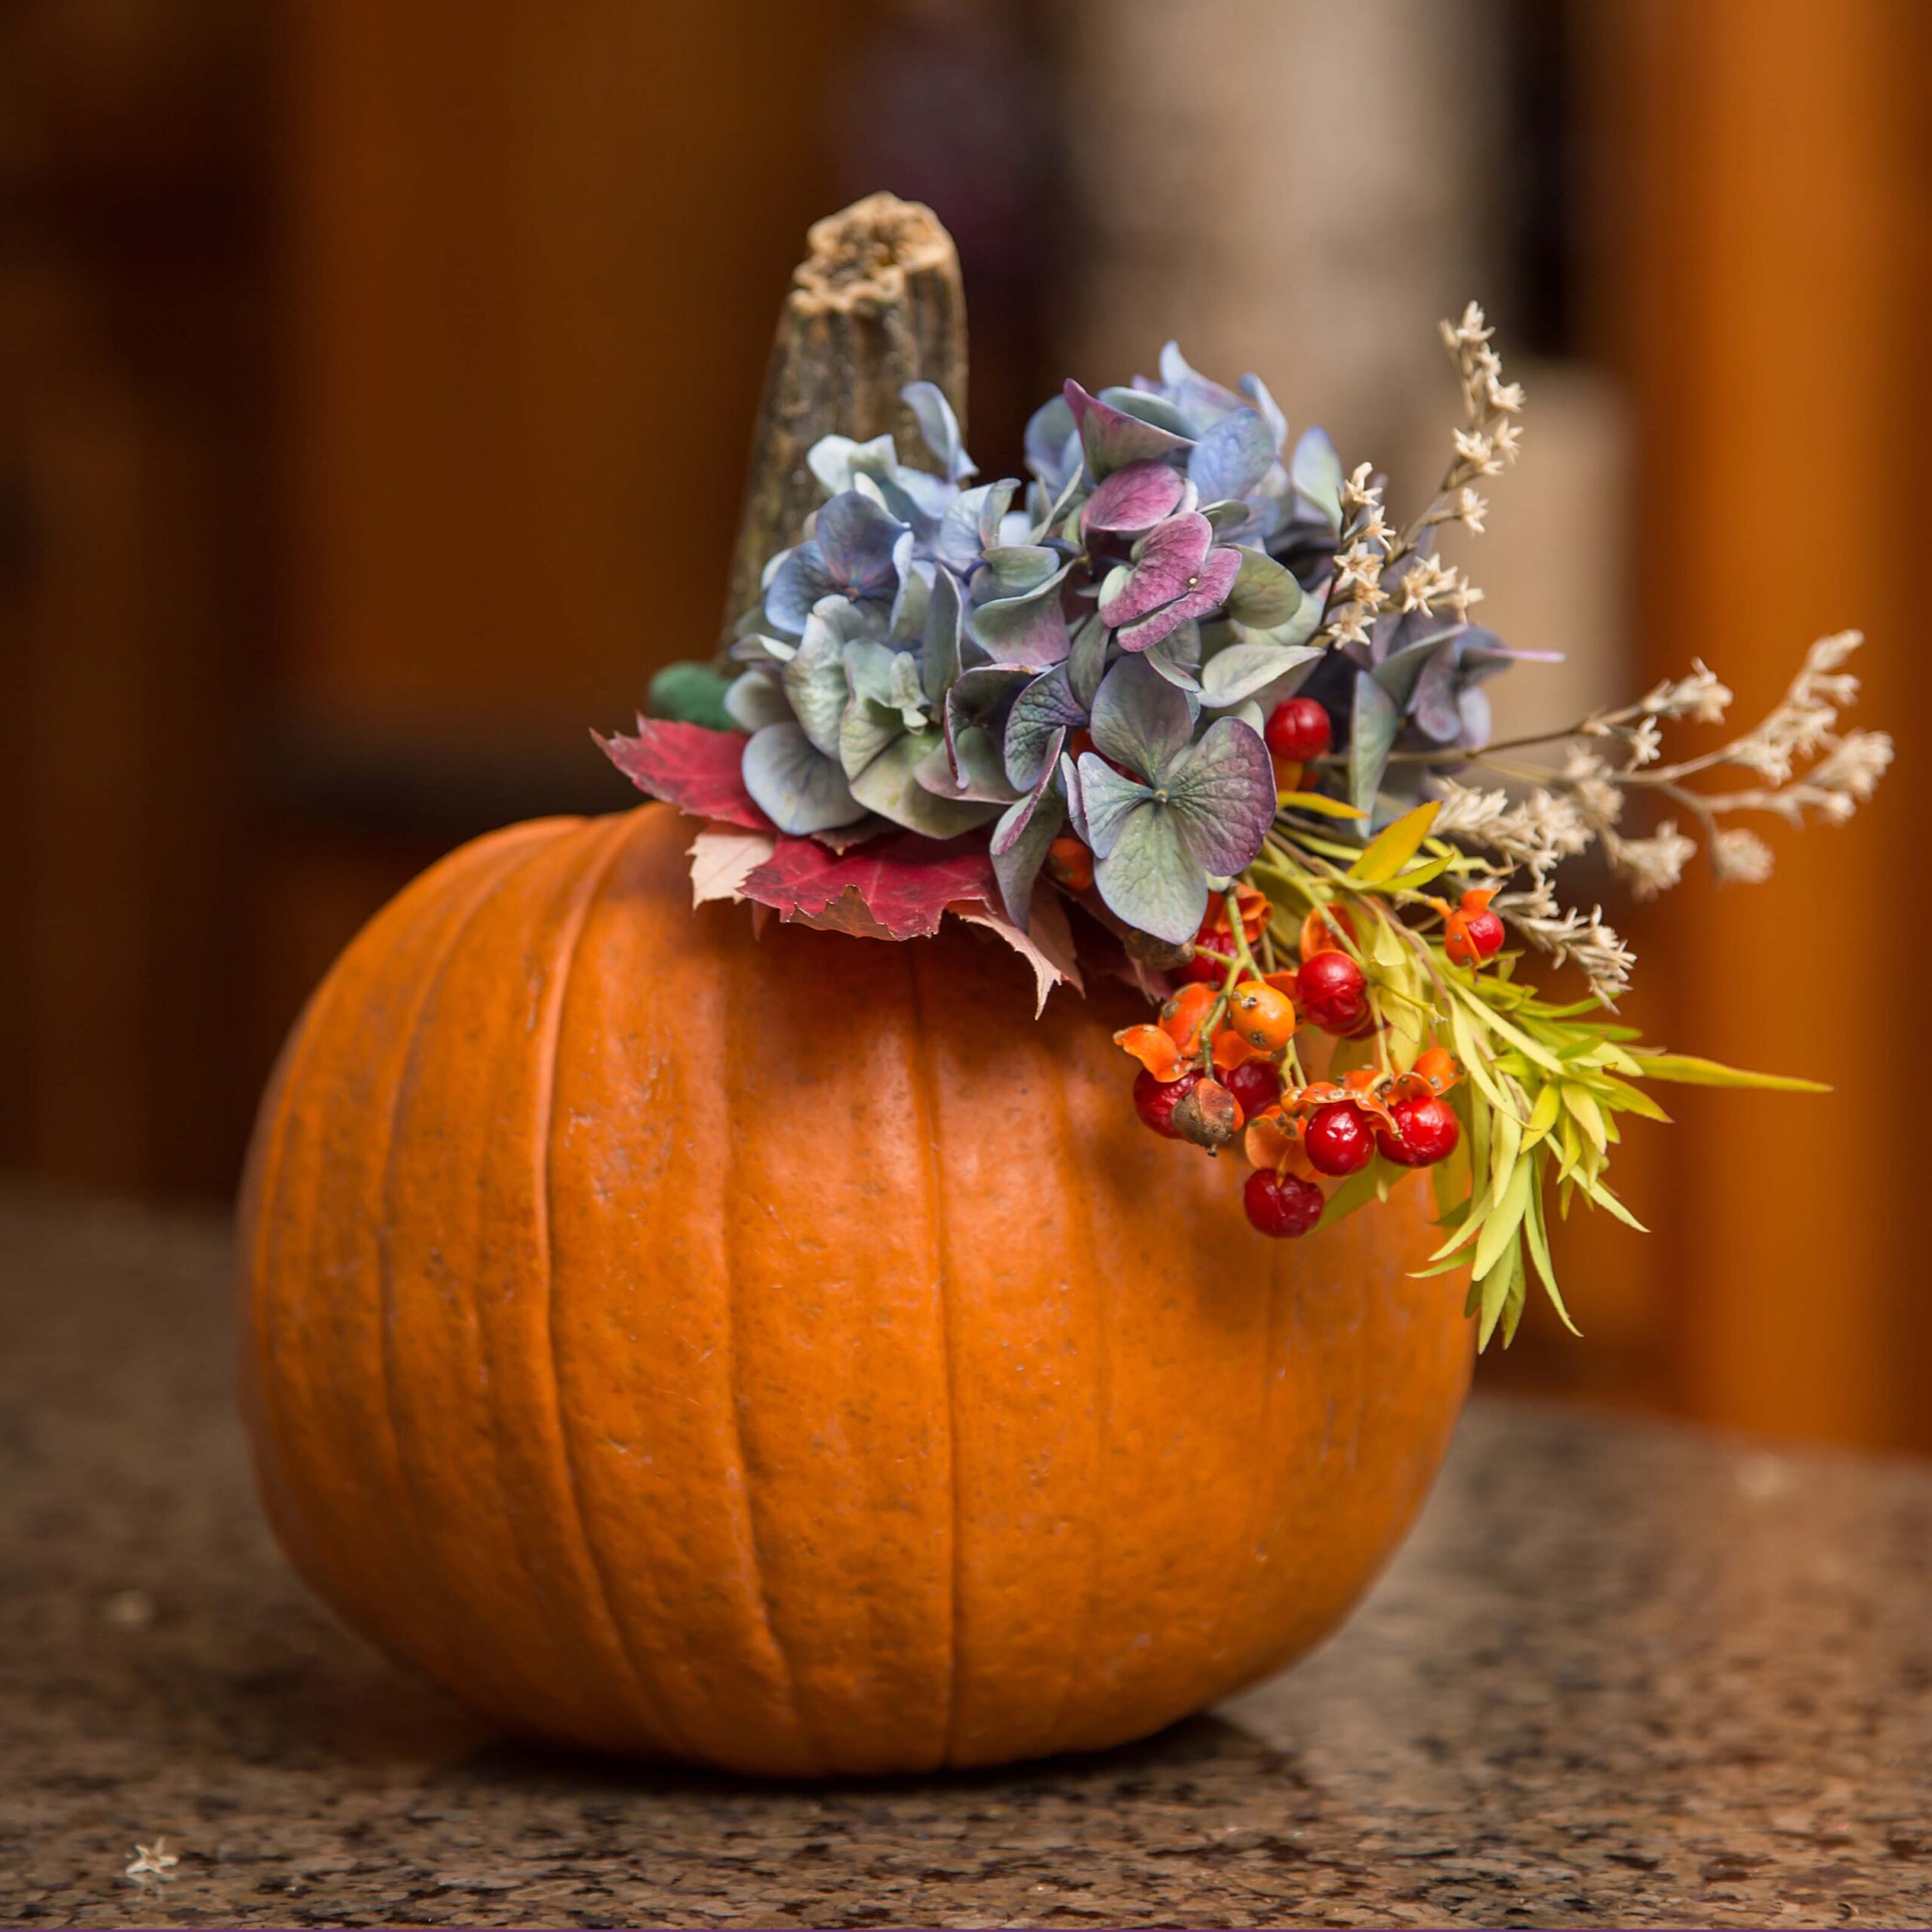 Diy Pumpkin Centerpiece With Fresh Flowers: Step-by-Step Guide